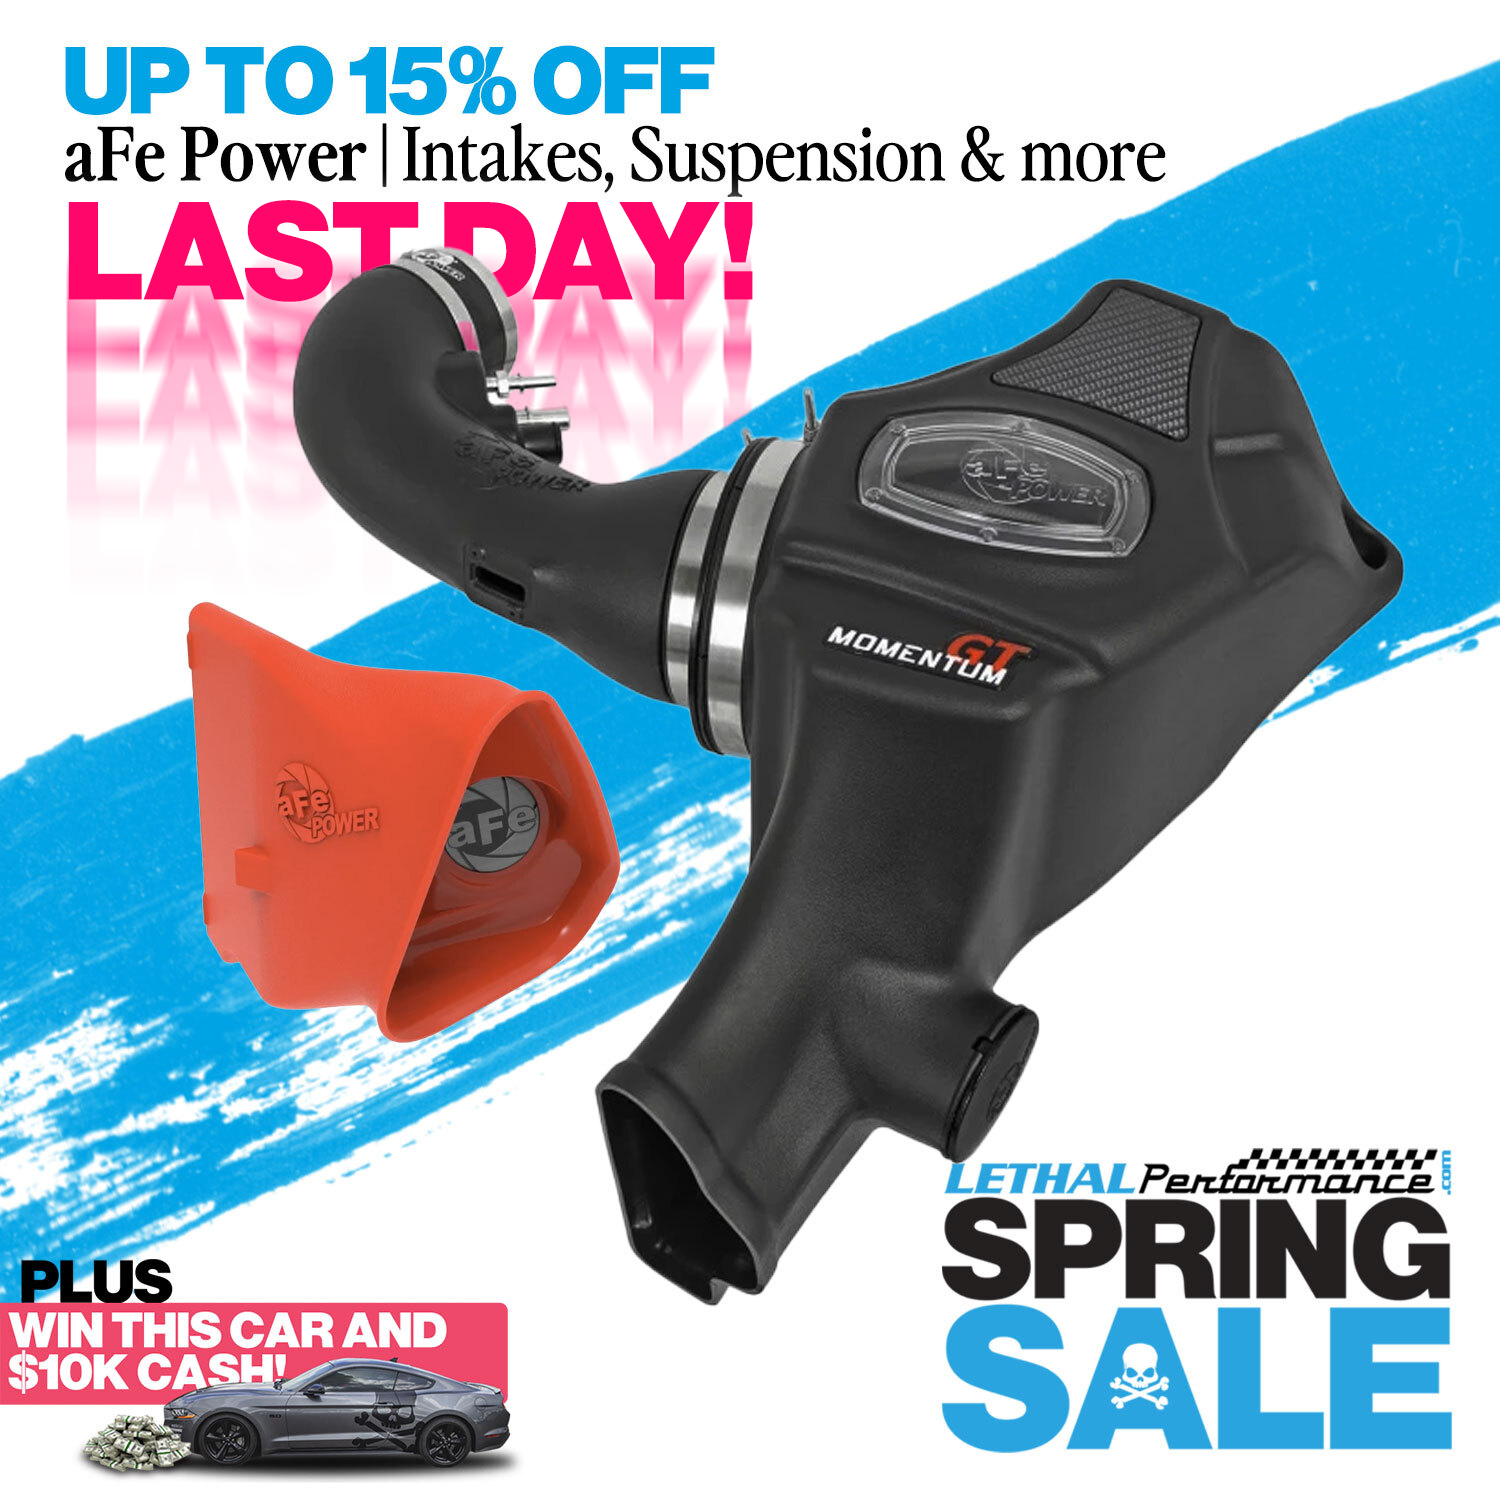 S650 Mustang Spring SALE has SPRUNG here at Lethal Performance!! last day spring sale afe must